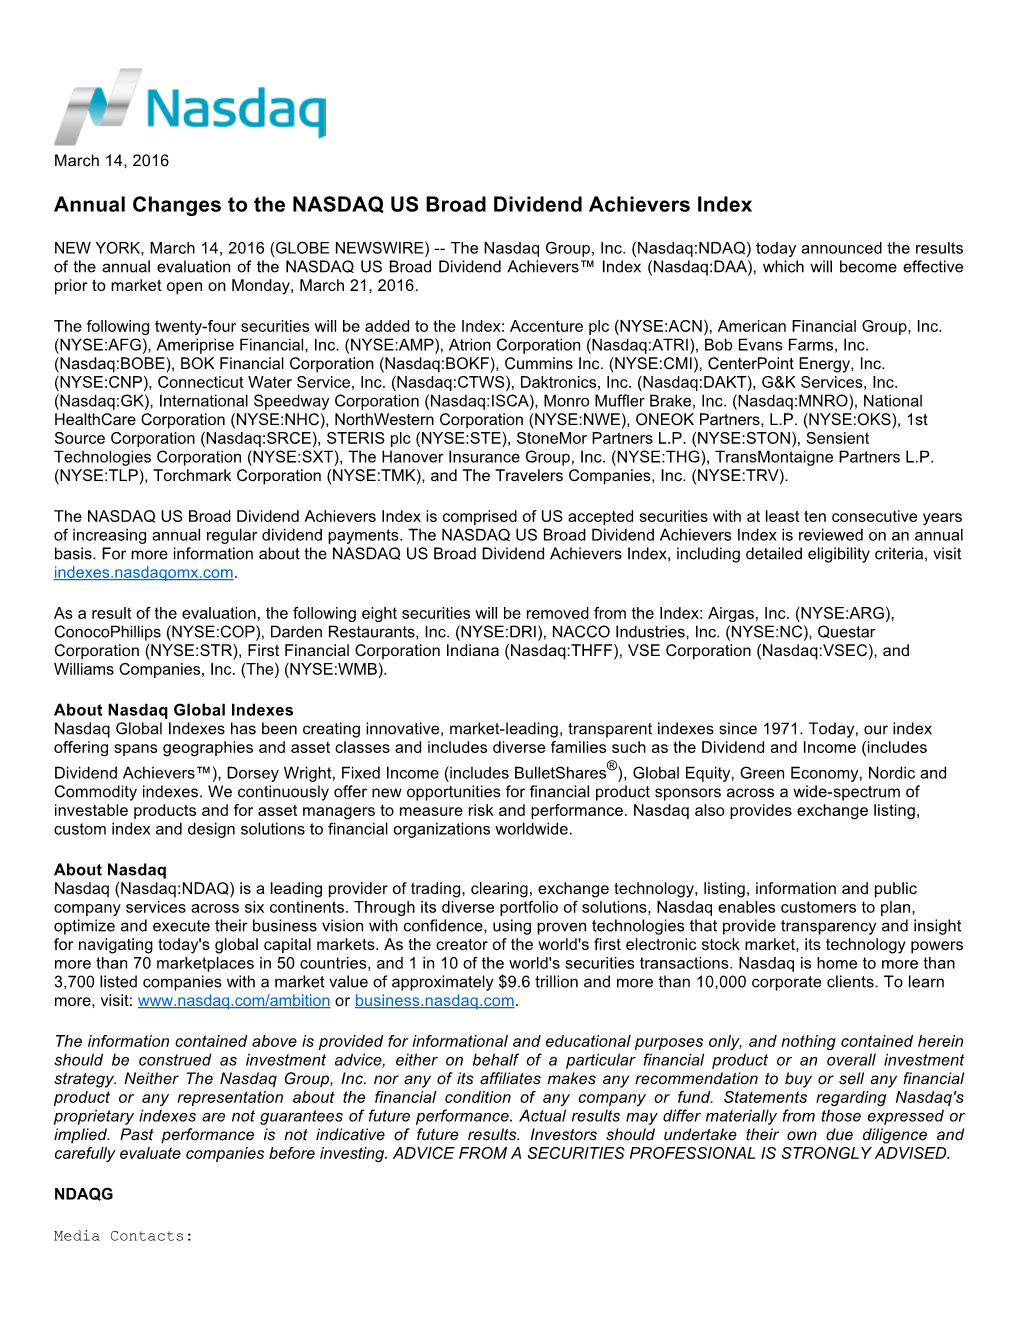 Annual Changes to the NASDAQ US Broad Dividend Achievers Index